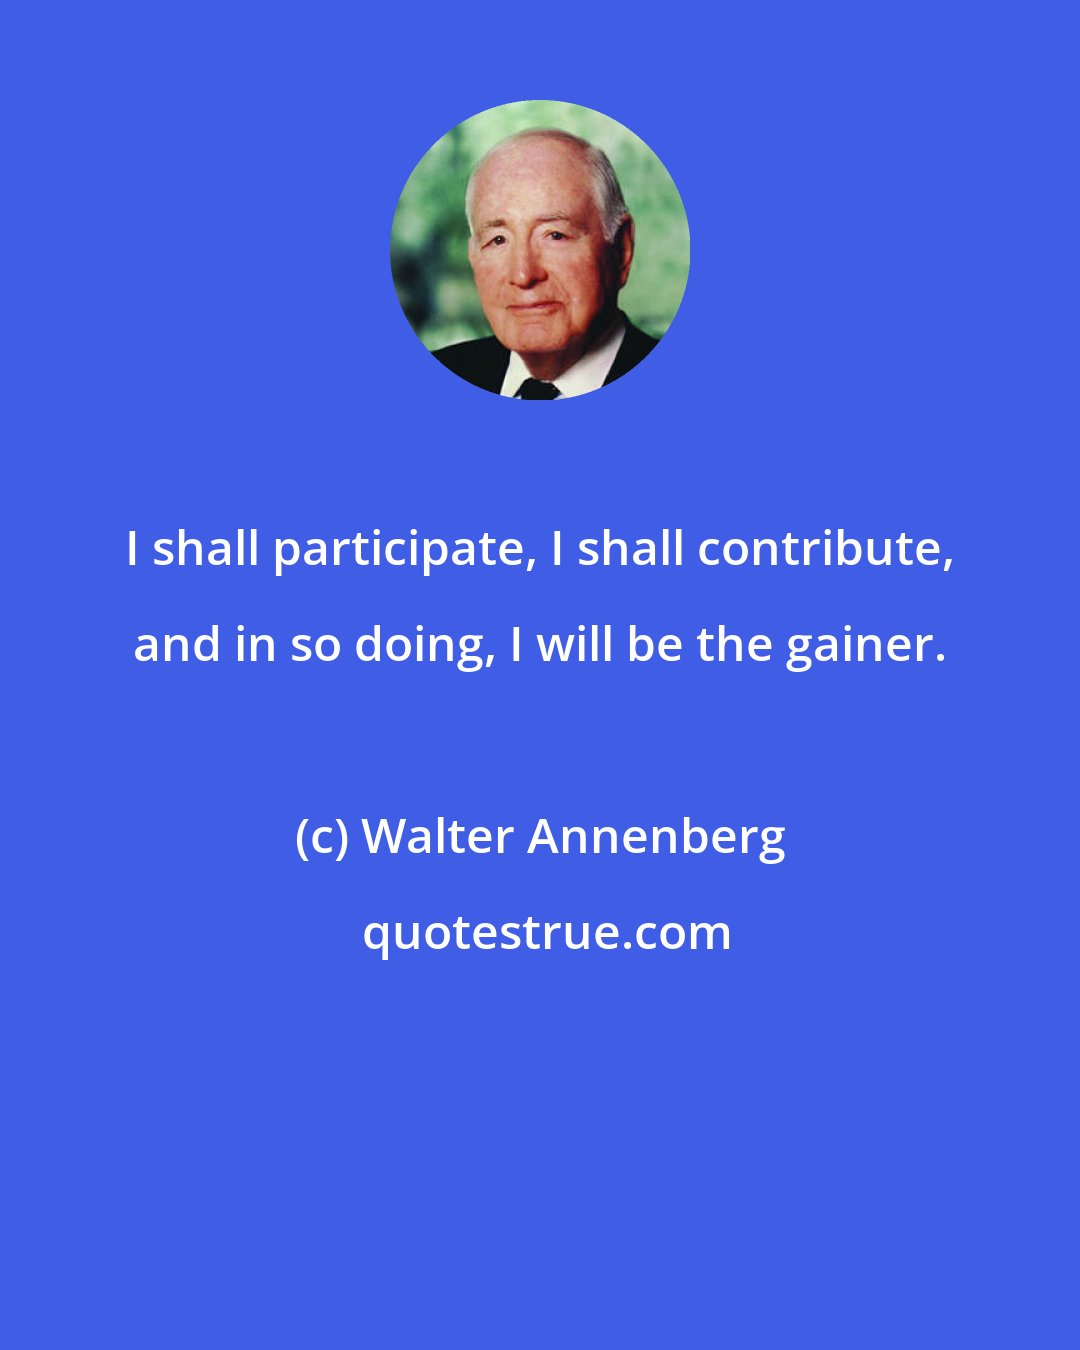 Walter Annenberg: I shall participate, I shall contribute, and in so doing, I will be the gainer.